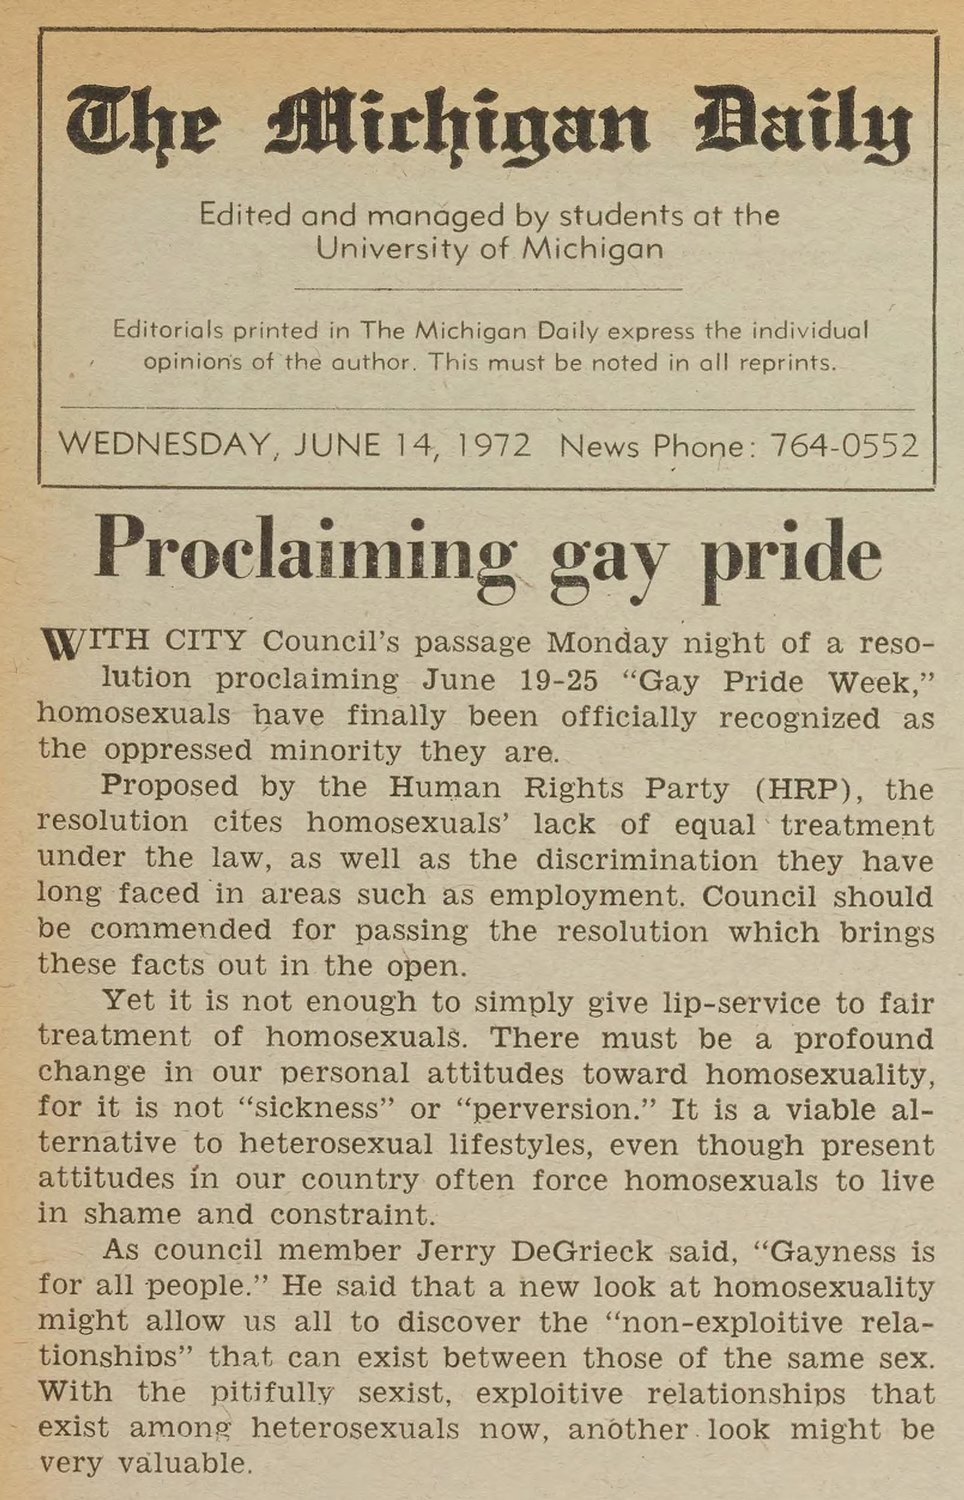 This 1972 editorial from the student newspaper at the University of Michigan comments the resolution by the Ann Arbor City Council proclaiming Gay Pride Week, “the first known official proclamation by a governmental body in the United States,” Tim Retzloff writes. “With a new Republican majority, the Council refused to issue a proclamation in 1973.”